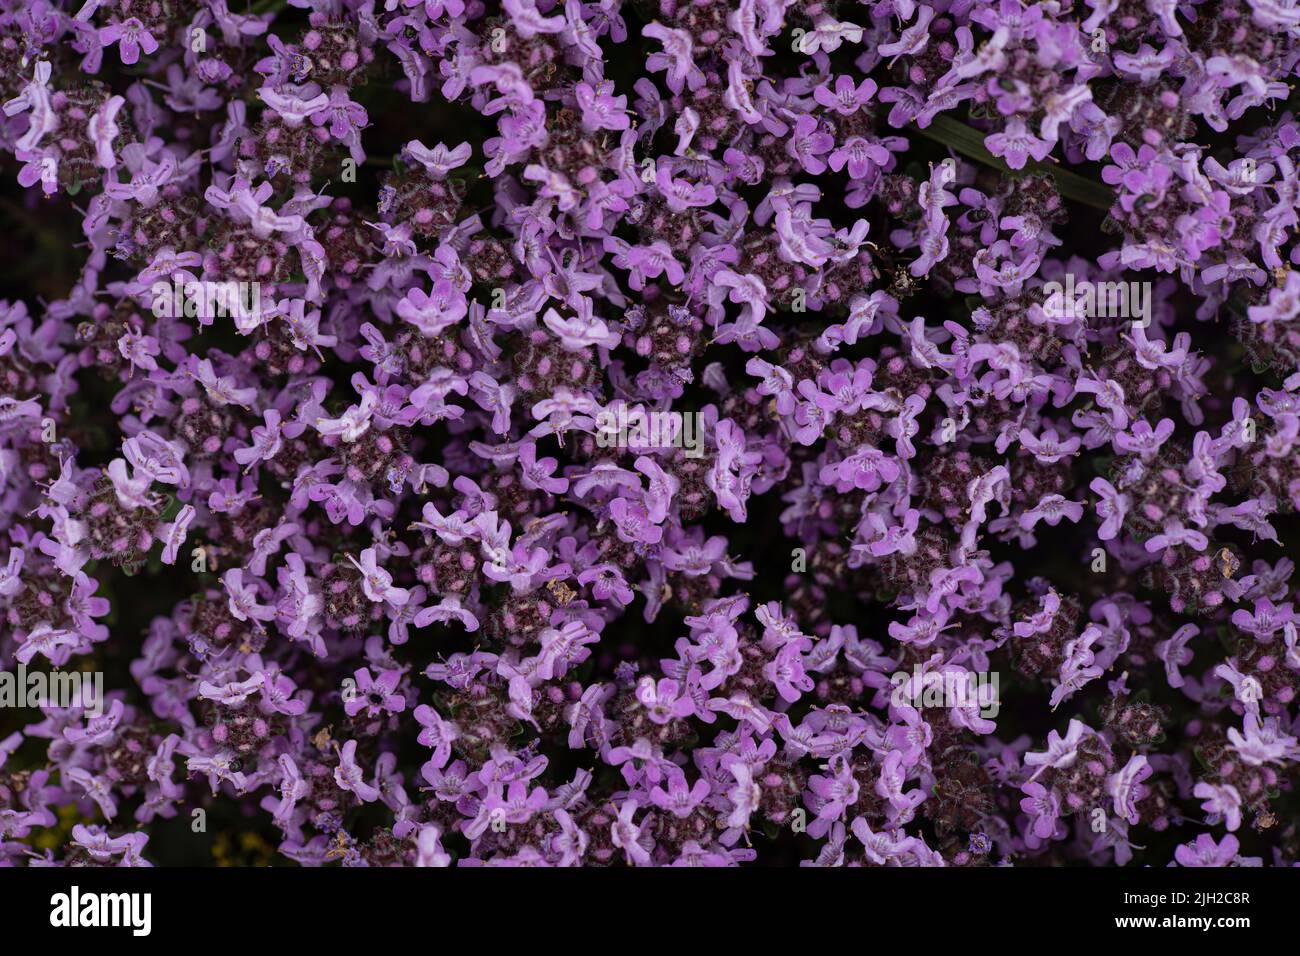 Closeup of wild thyme growing on the ground. Stock Photo